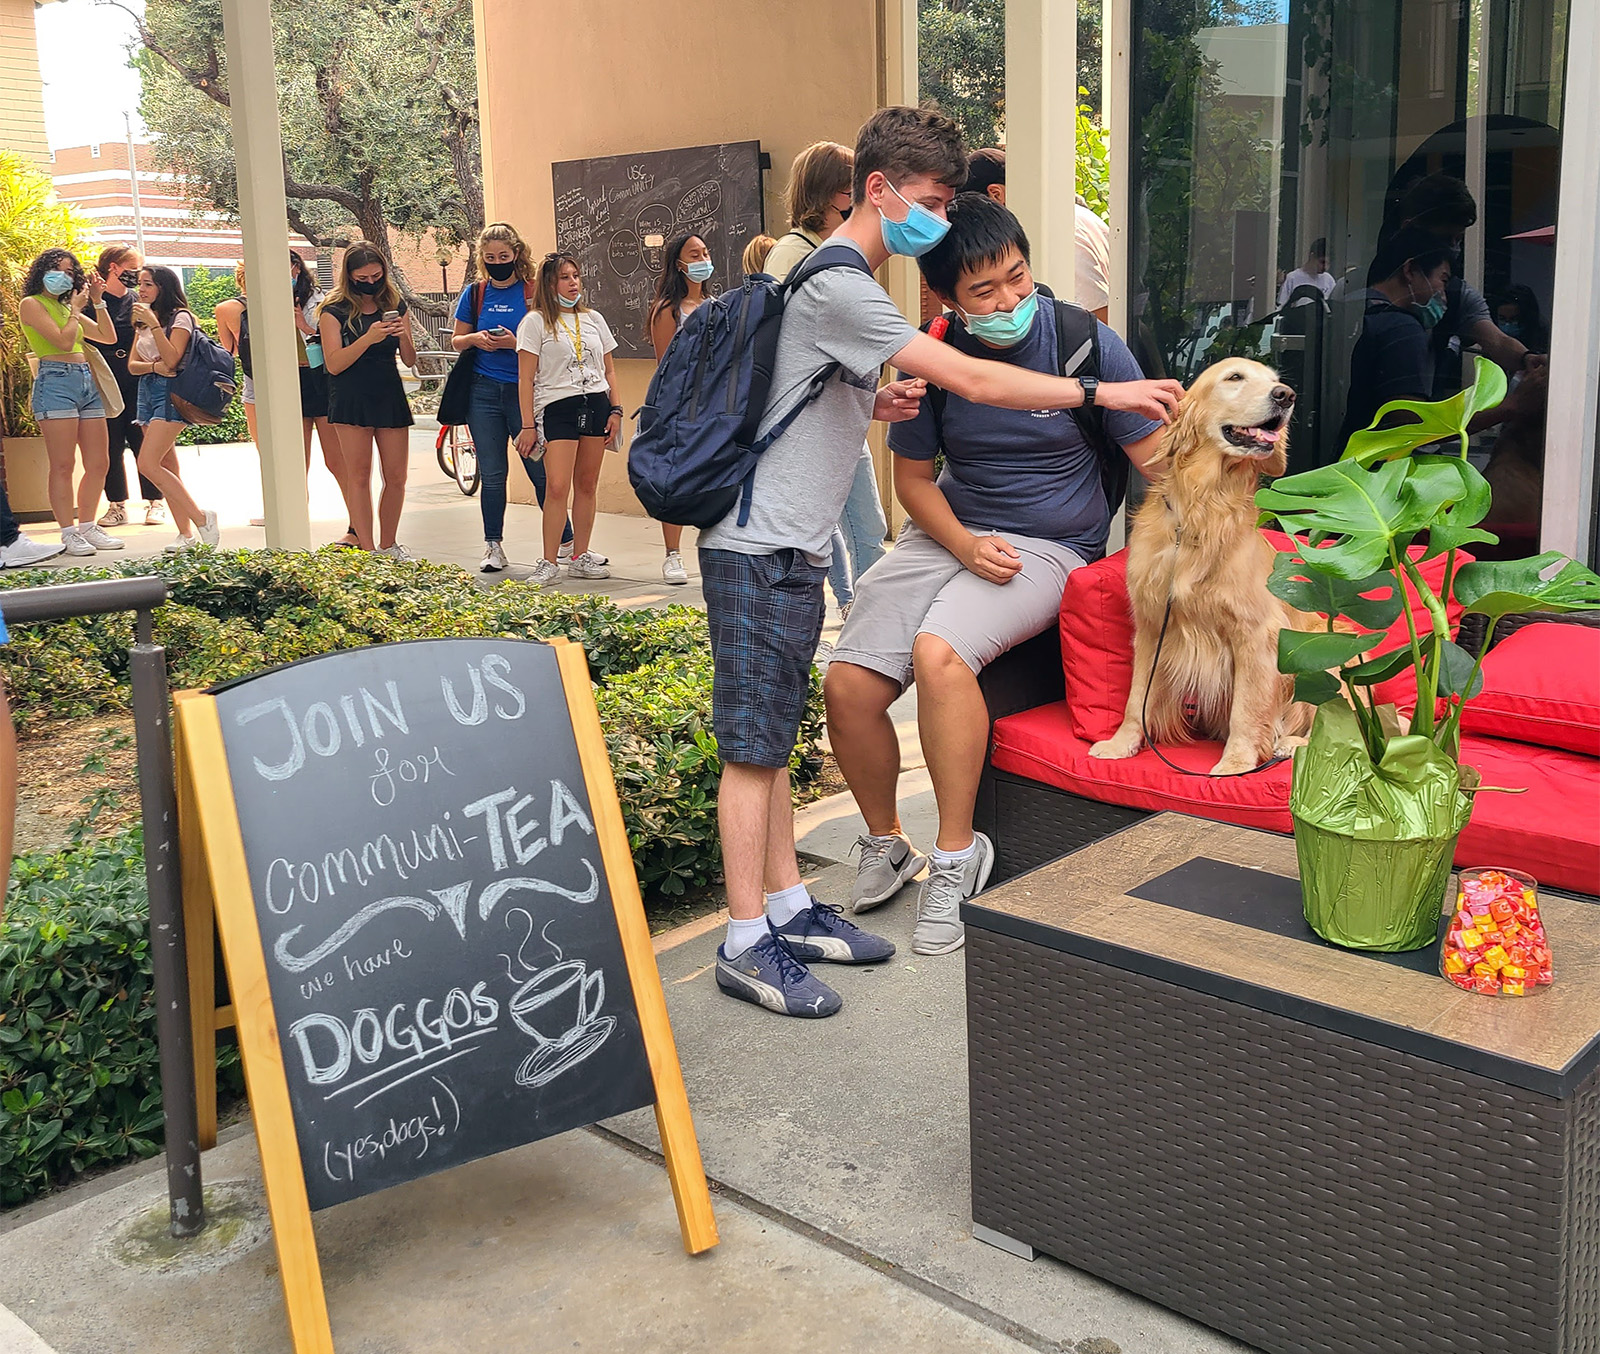 Students pet dogs during an event sponsored by USC's Office of Religious and Spiritual Life in Los Angeles. Photo courtesy Vanessa Gomez Brake